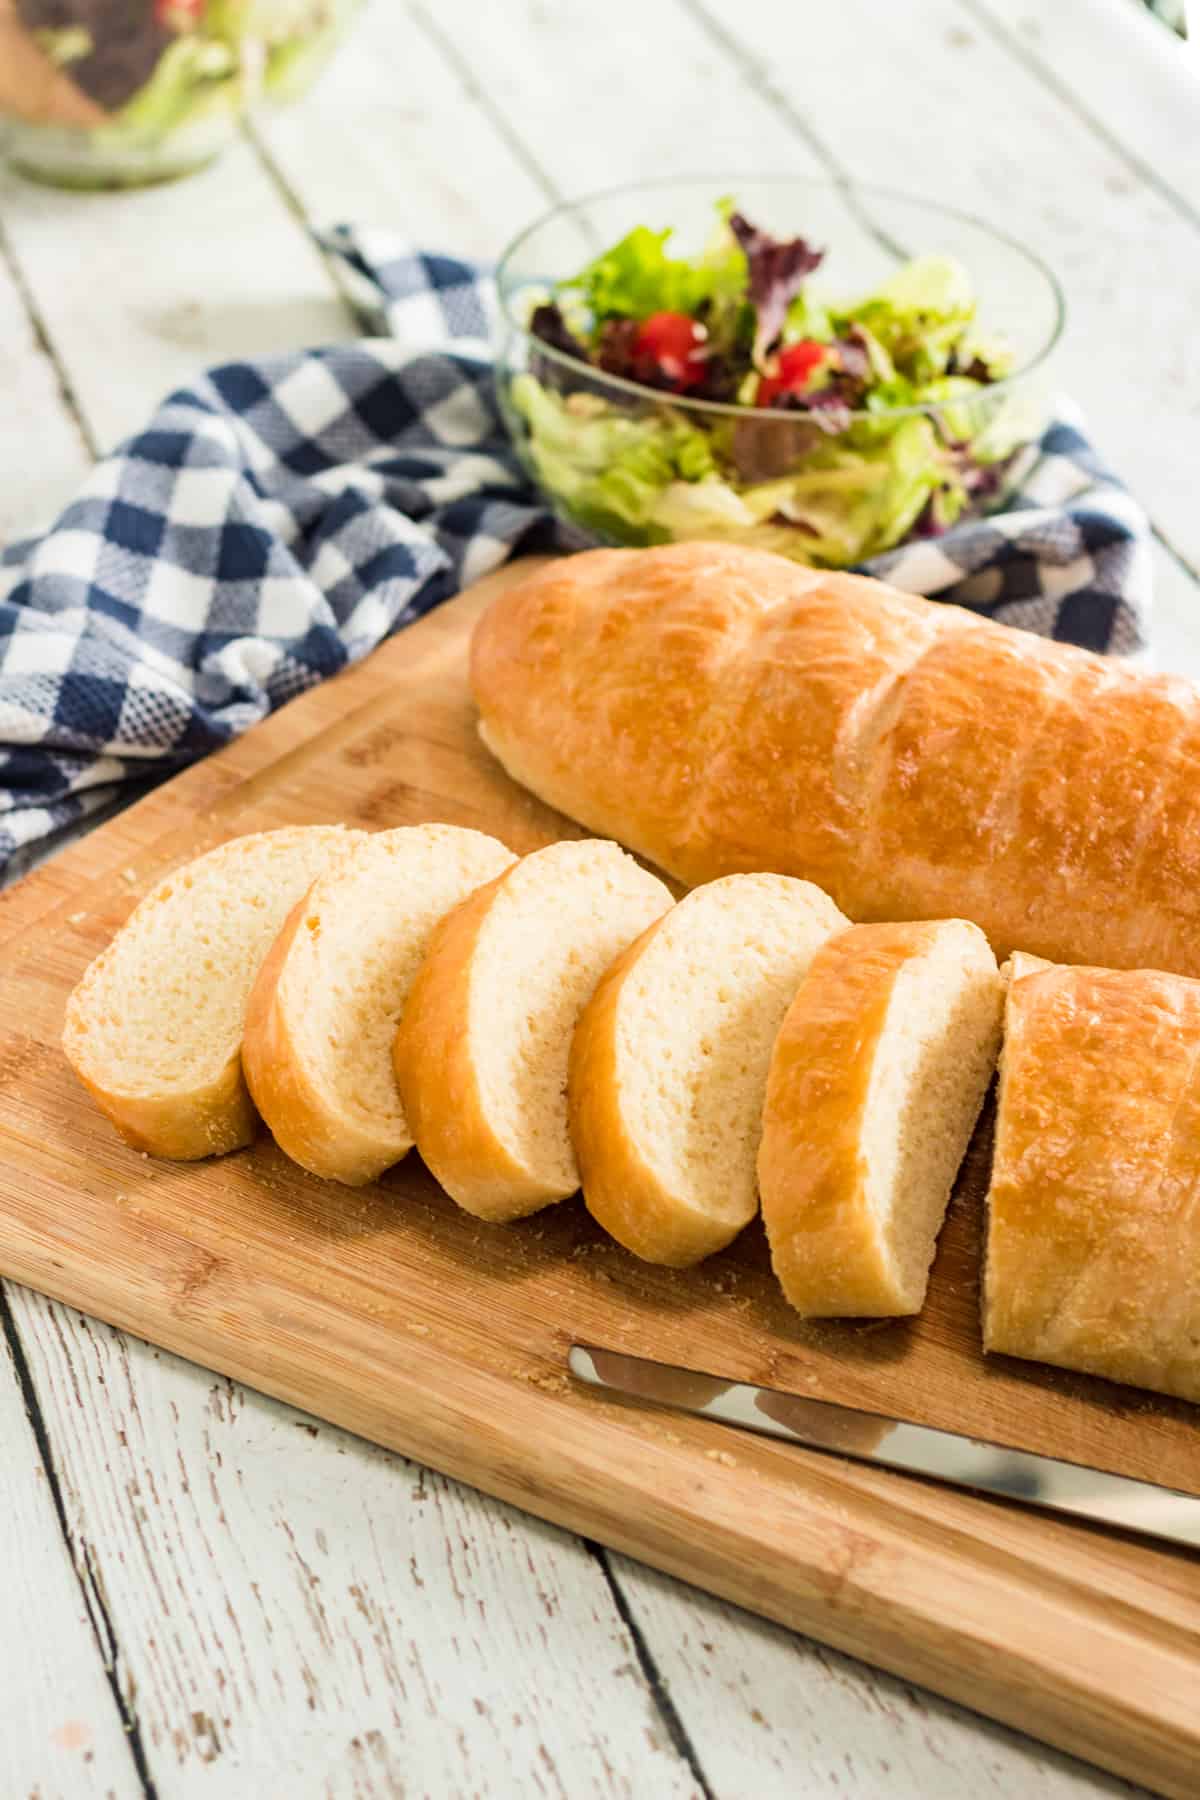 Easy Homemade French Bread Loaf Recipe